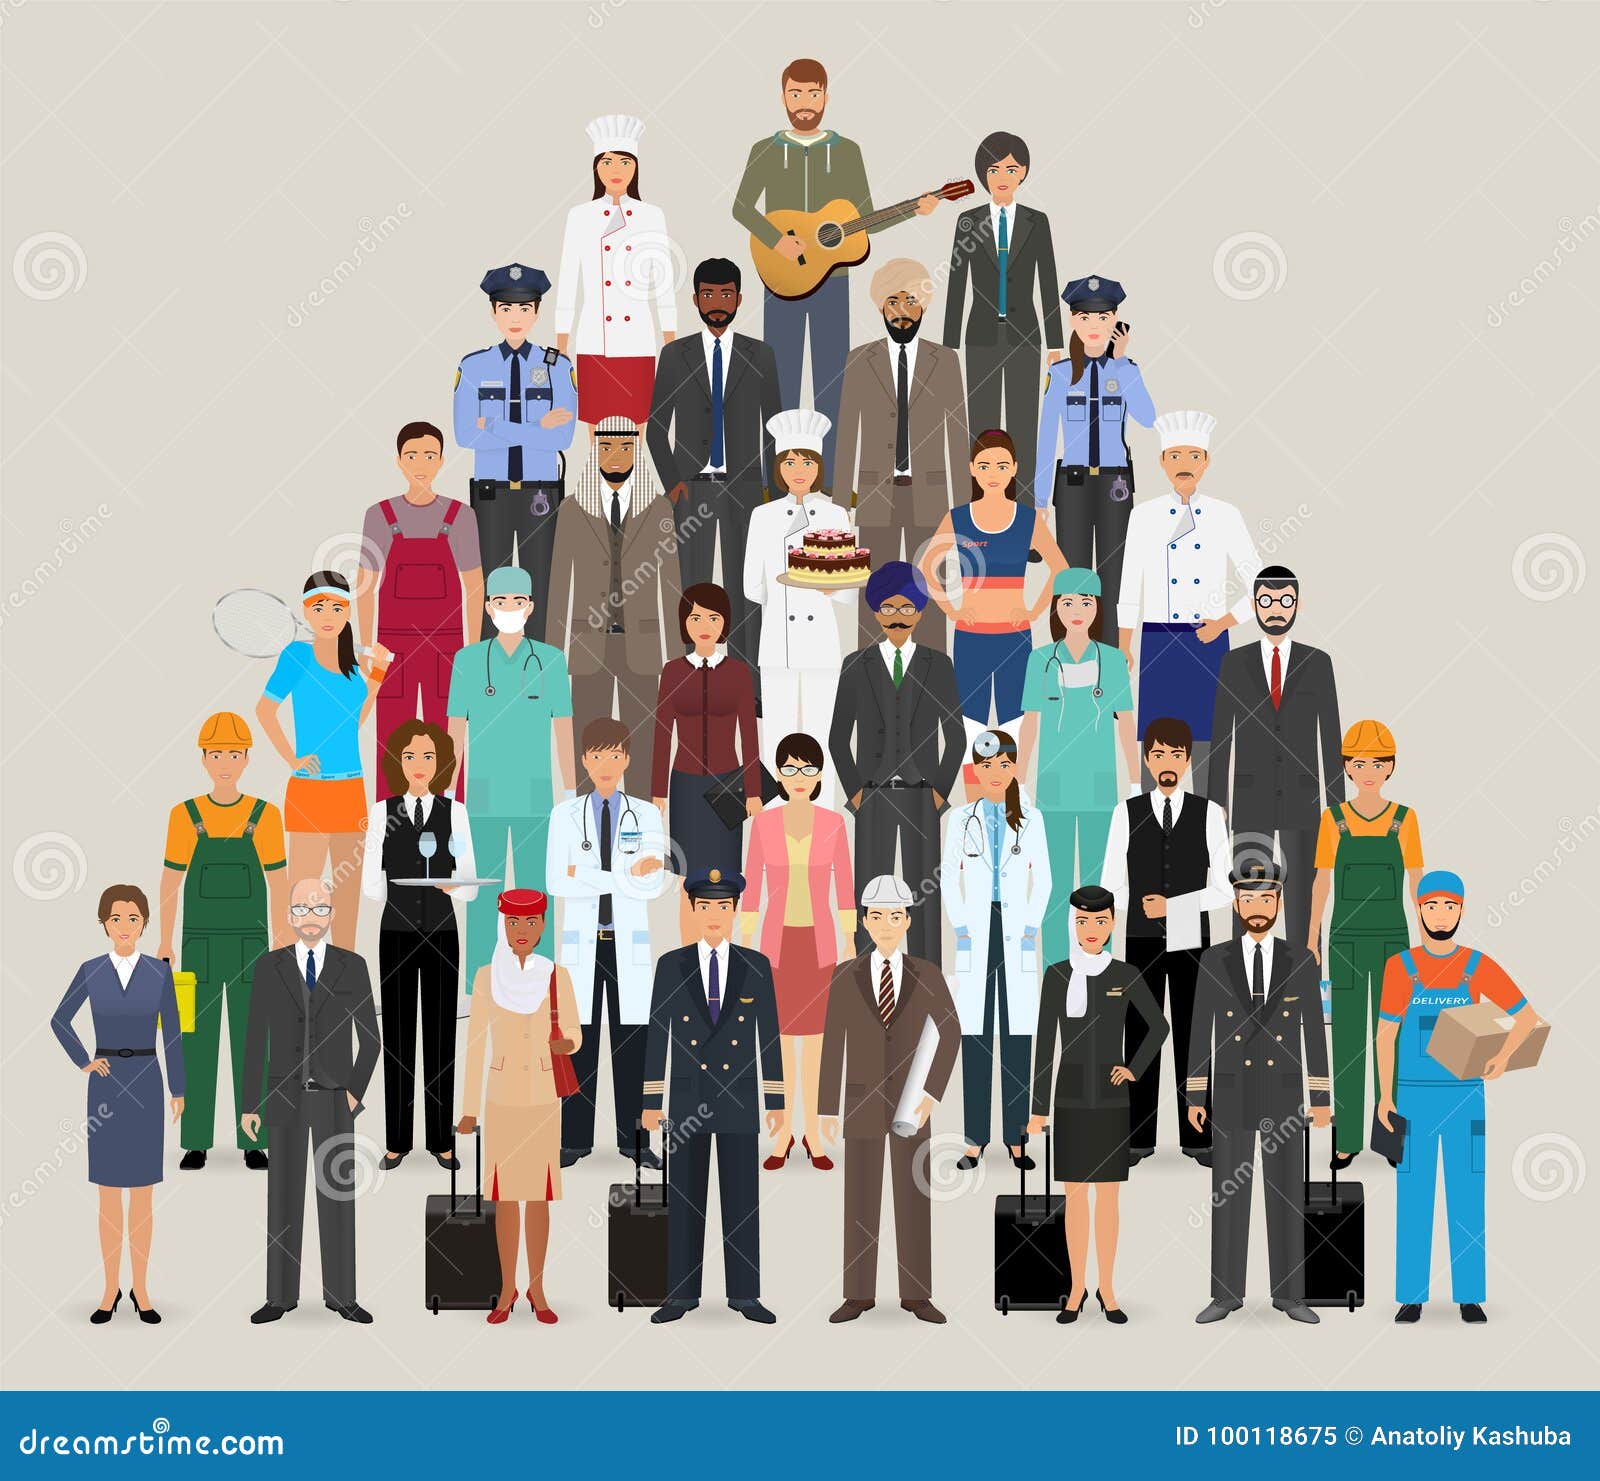 group of people with different occupation. employee and workers characters standing together.